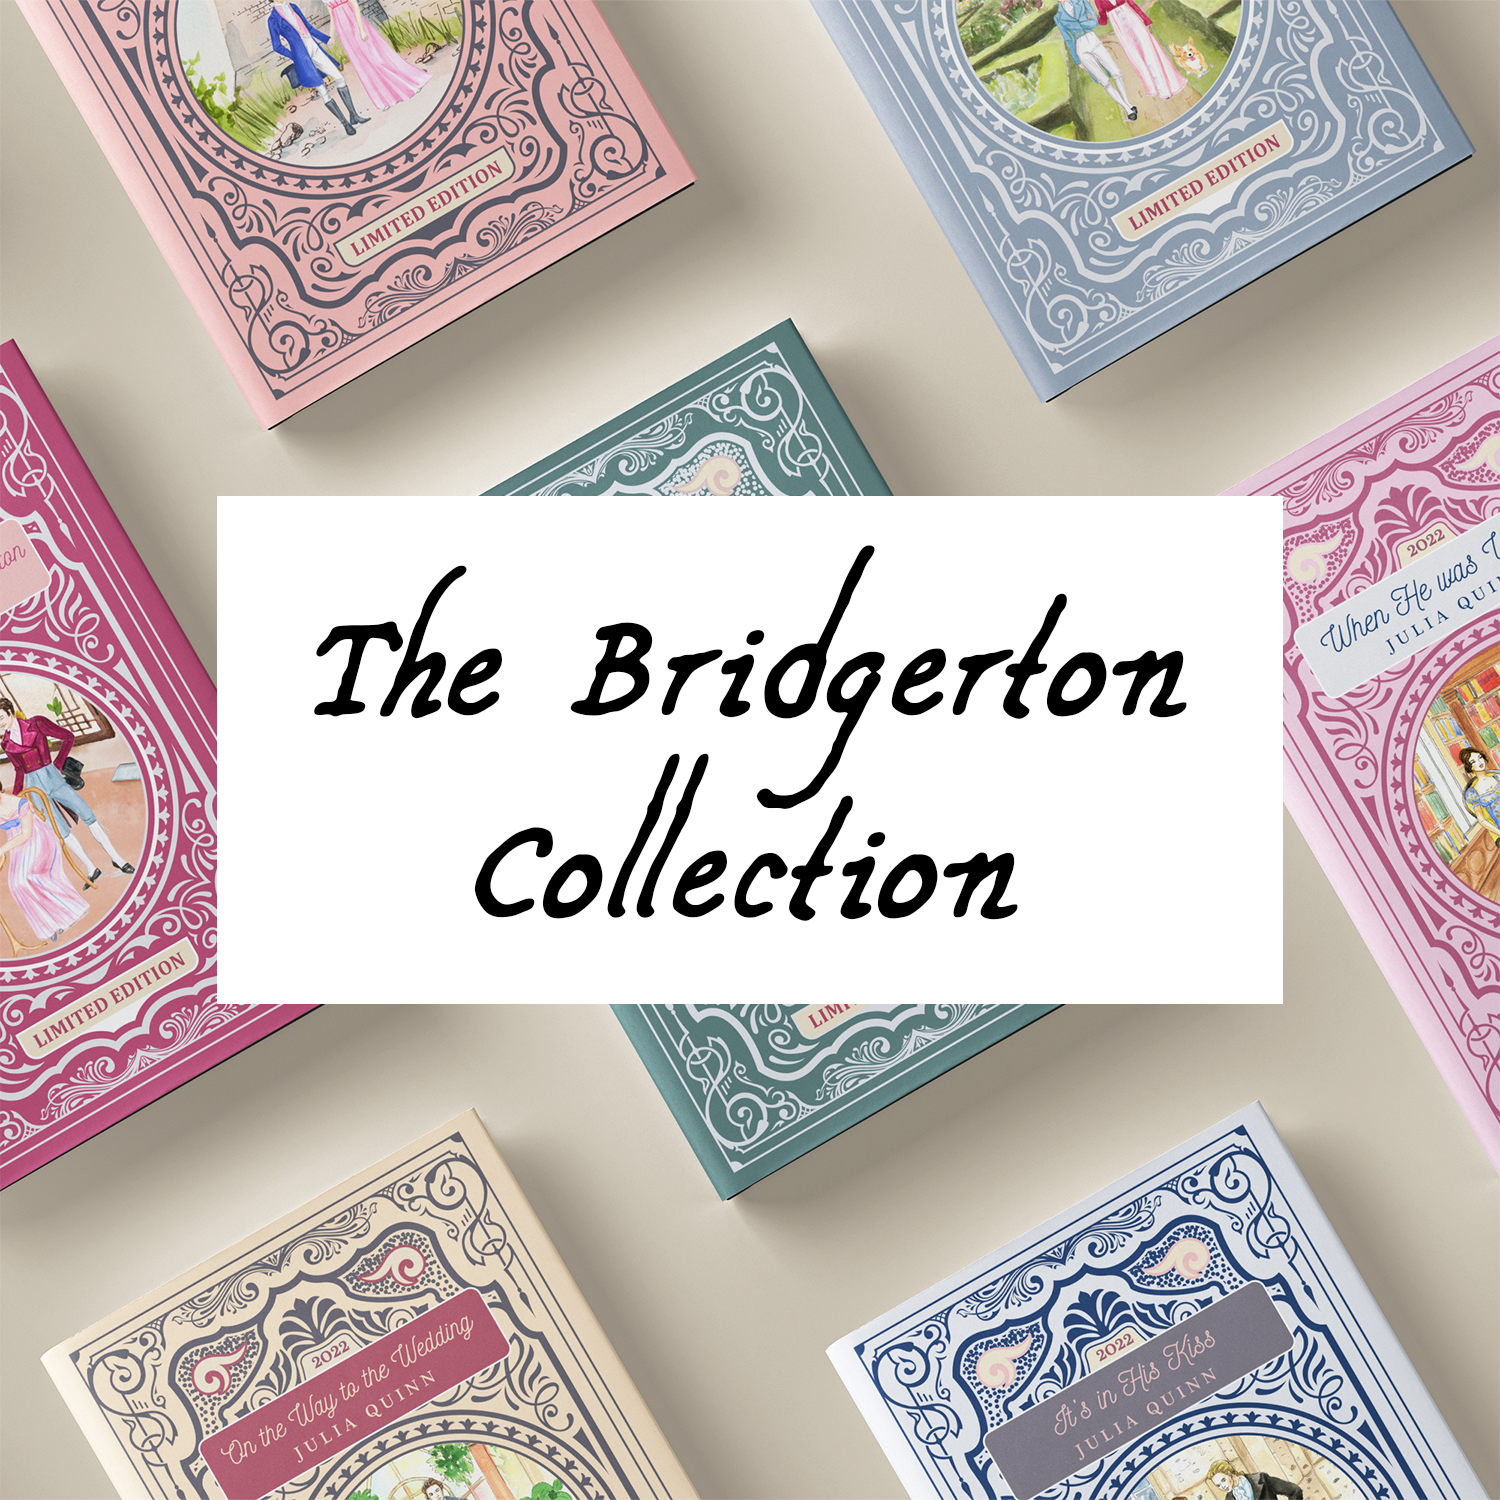 "The Bridgerton Collection" is centered over a background of hardcover Bridgerton special editions